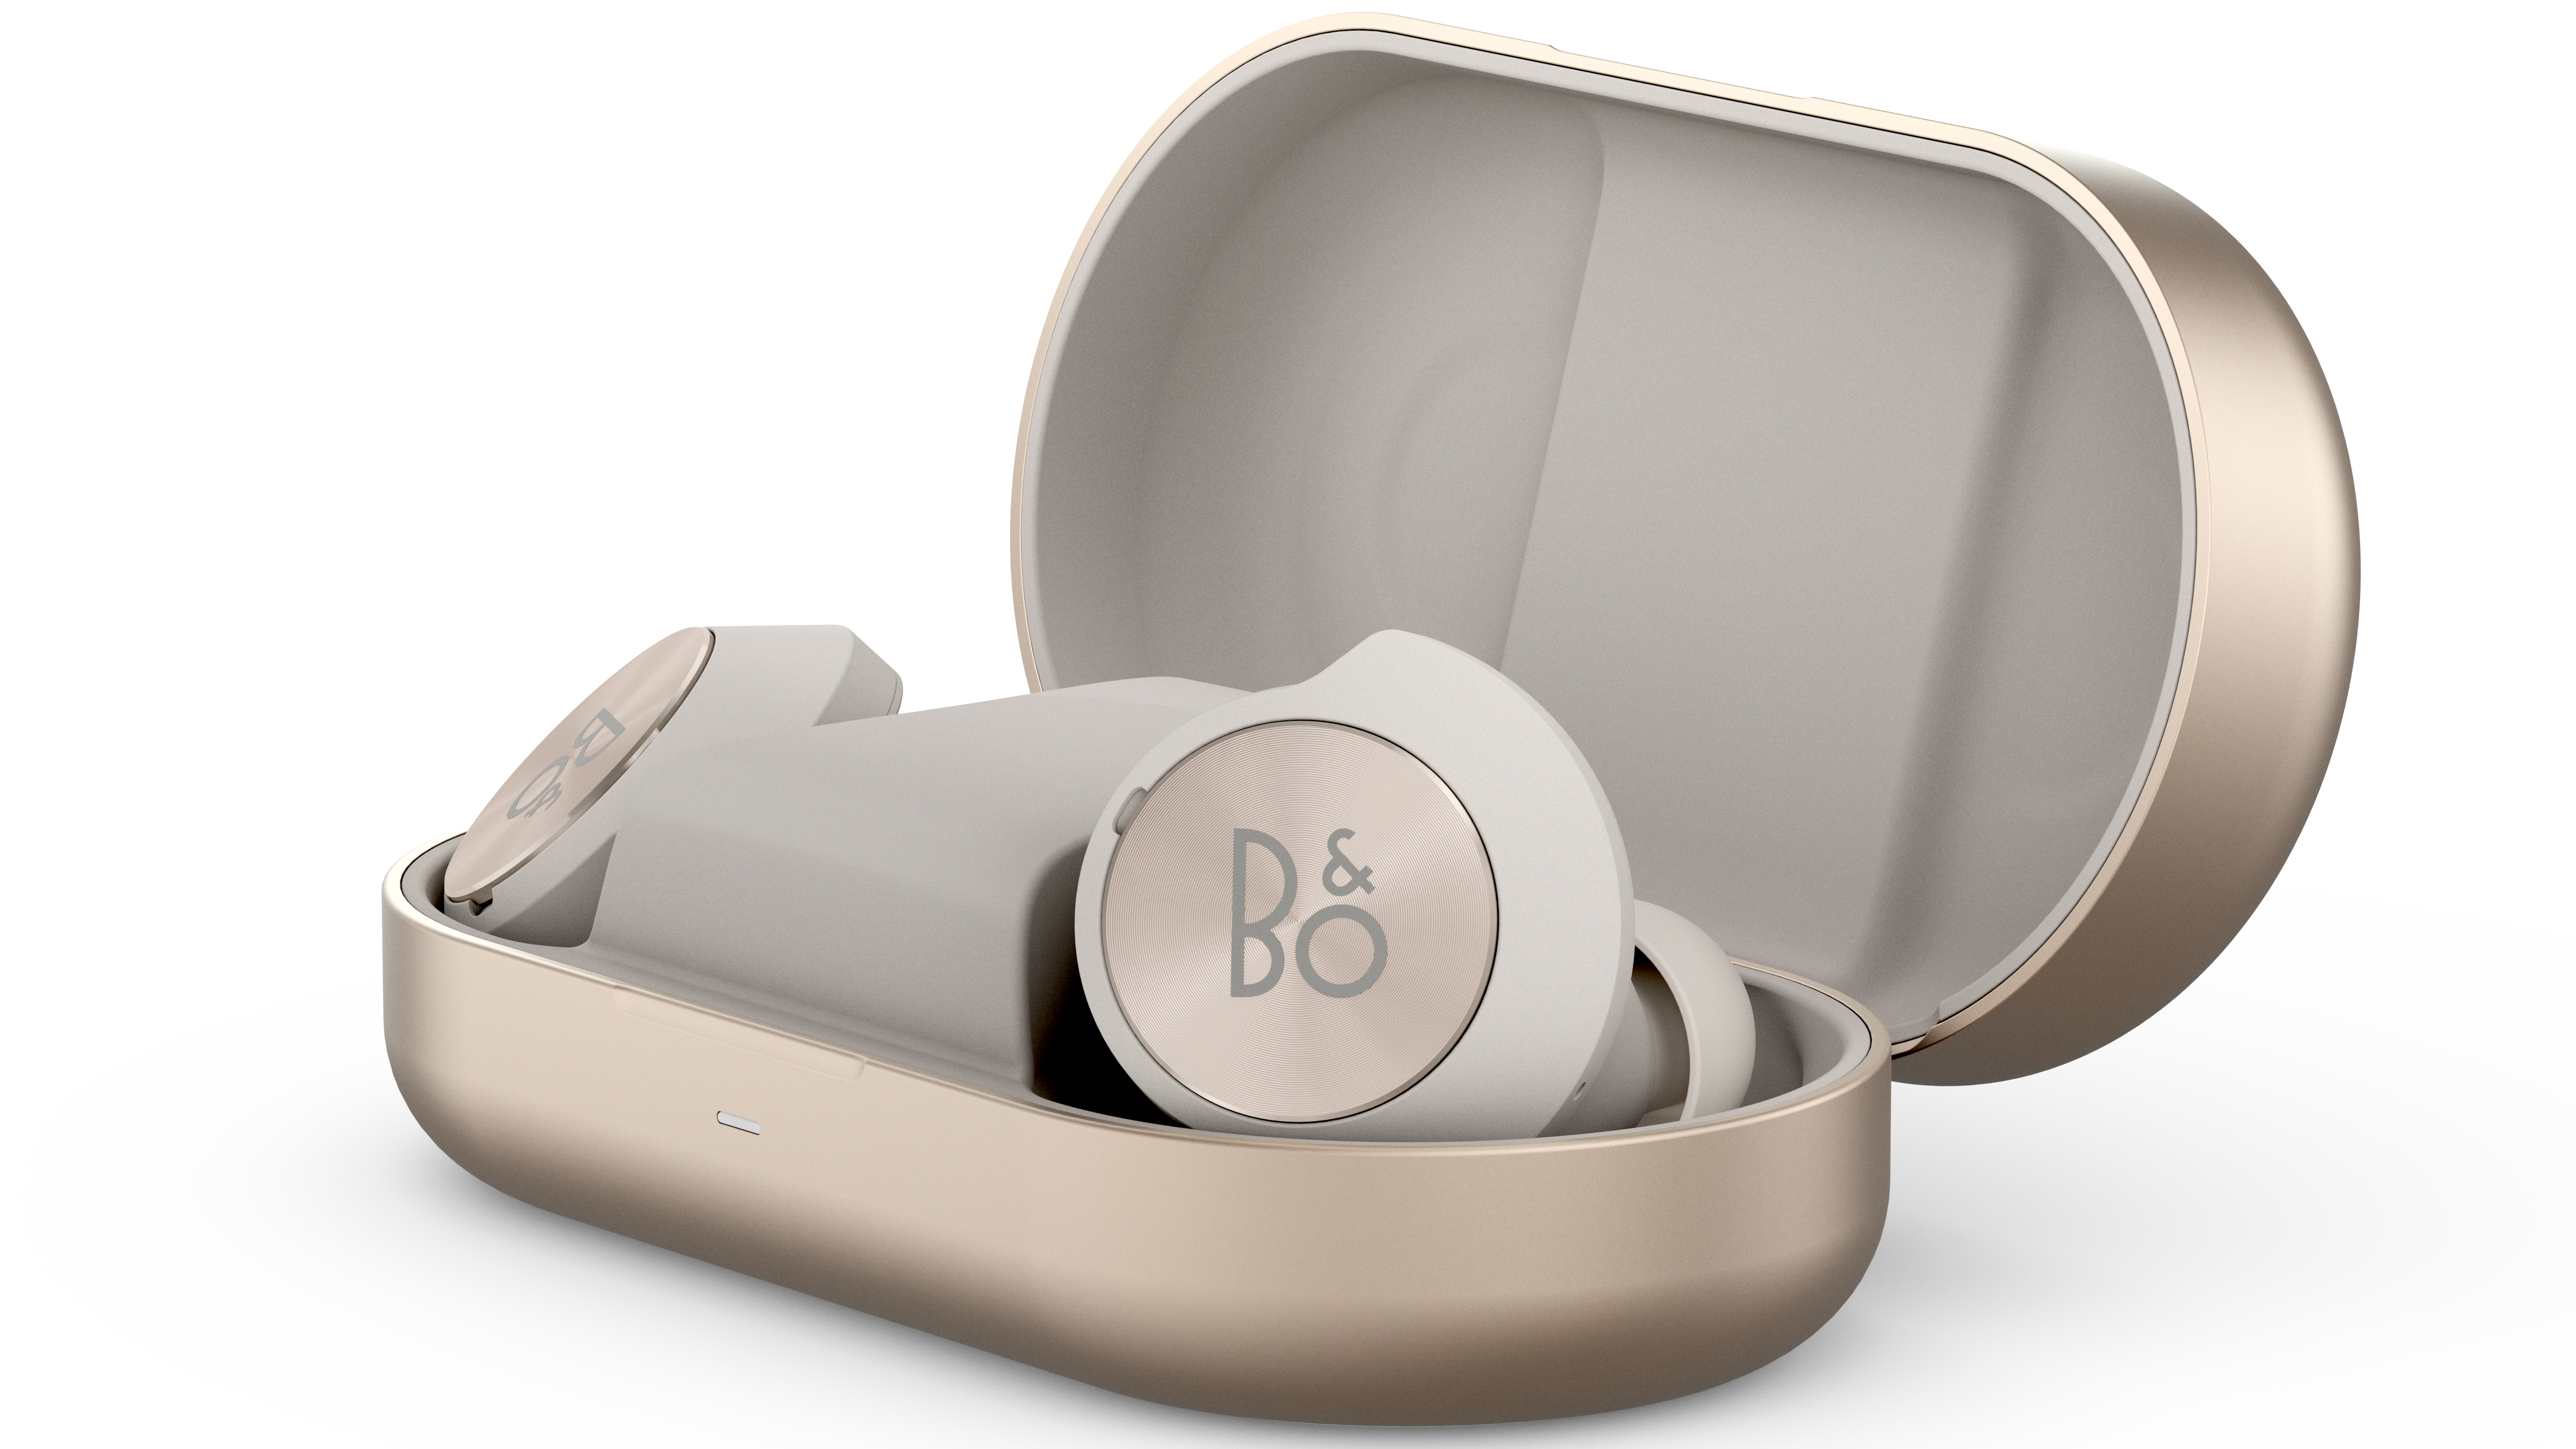 Bang & Olufsen unveils Beoplay EQ earbuds with adaptive active